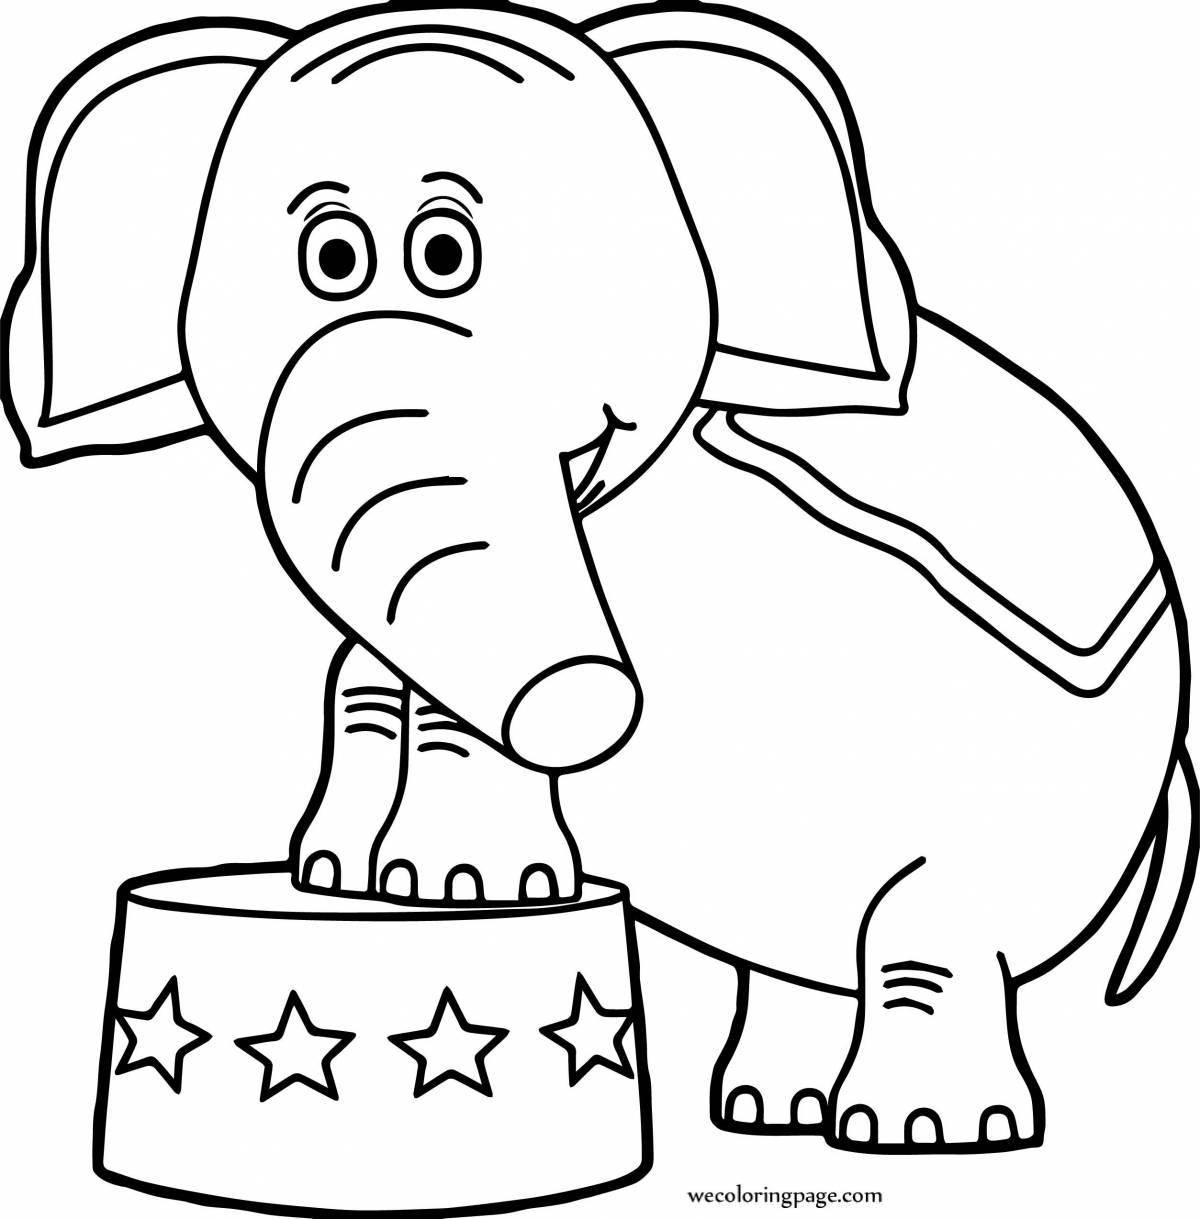 Charming circus elephant coloring book